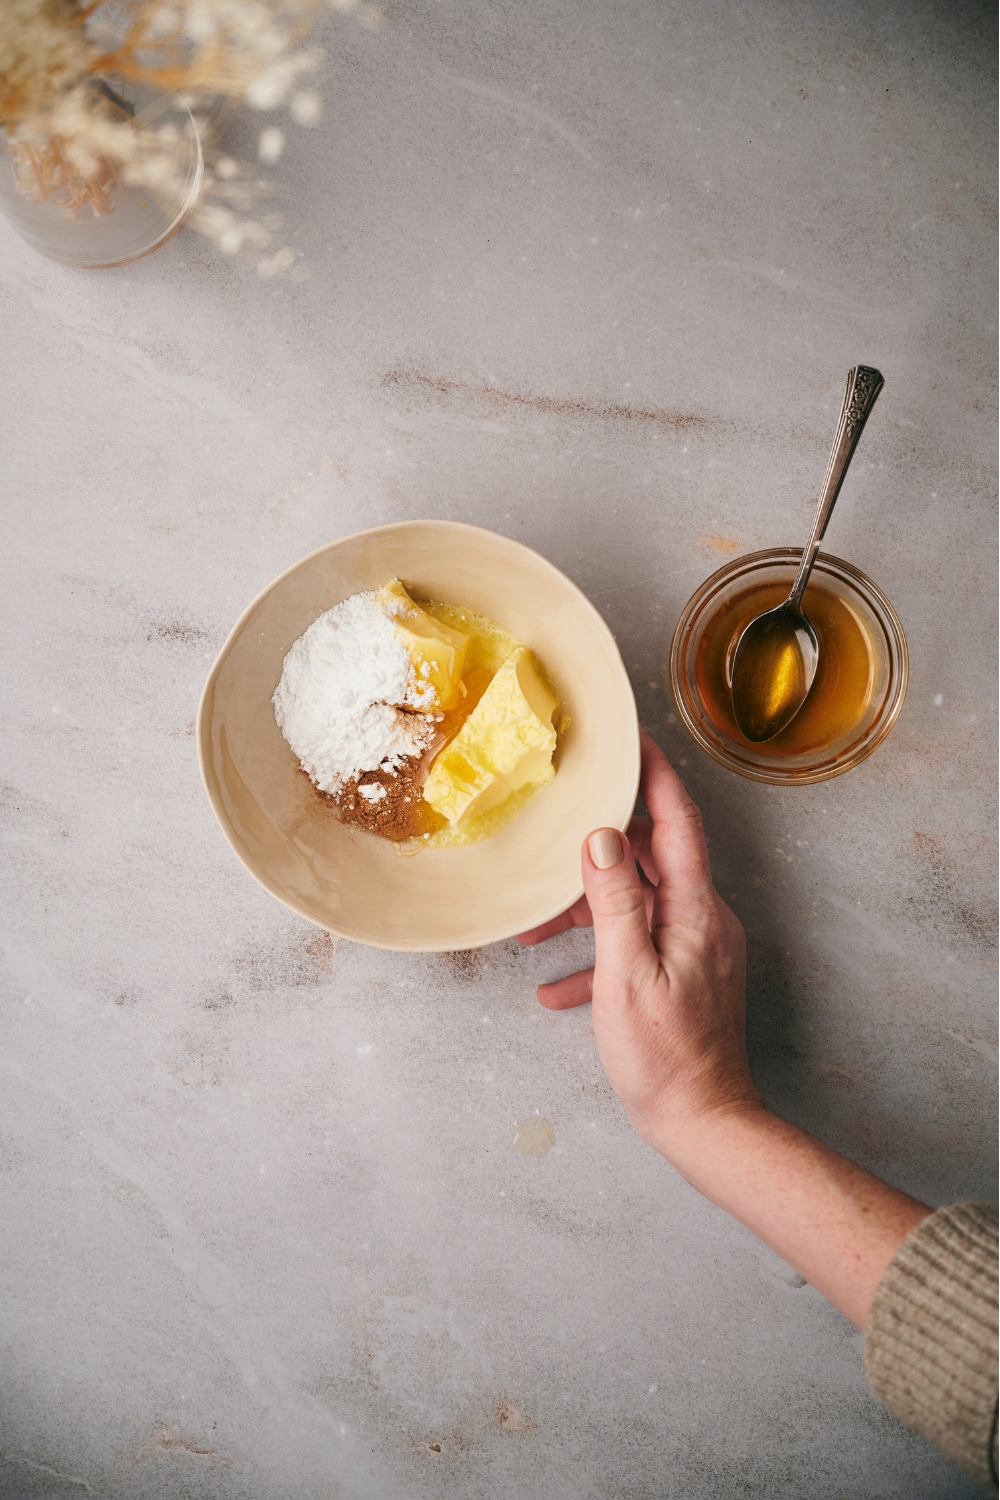 An off-white bowl filled with softened butter, powdered sugar, cinnamon, and honey, with a hand positioning the bowl next to a small bowl of honey with a spoon in it.